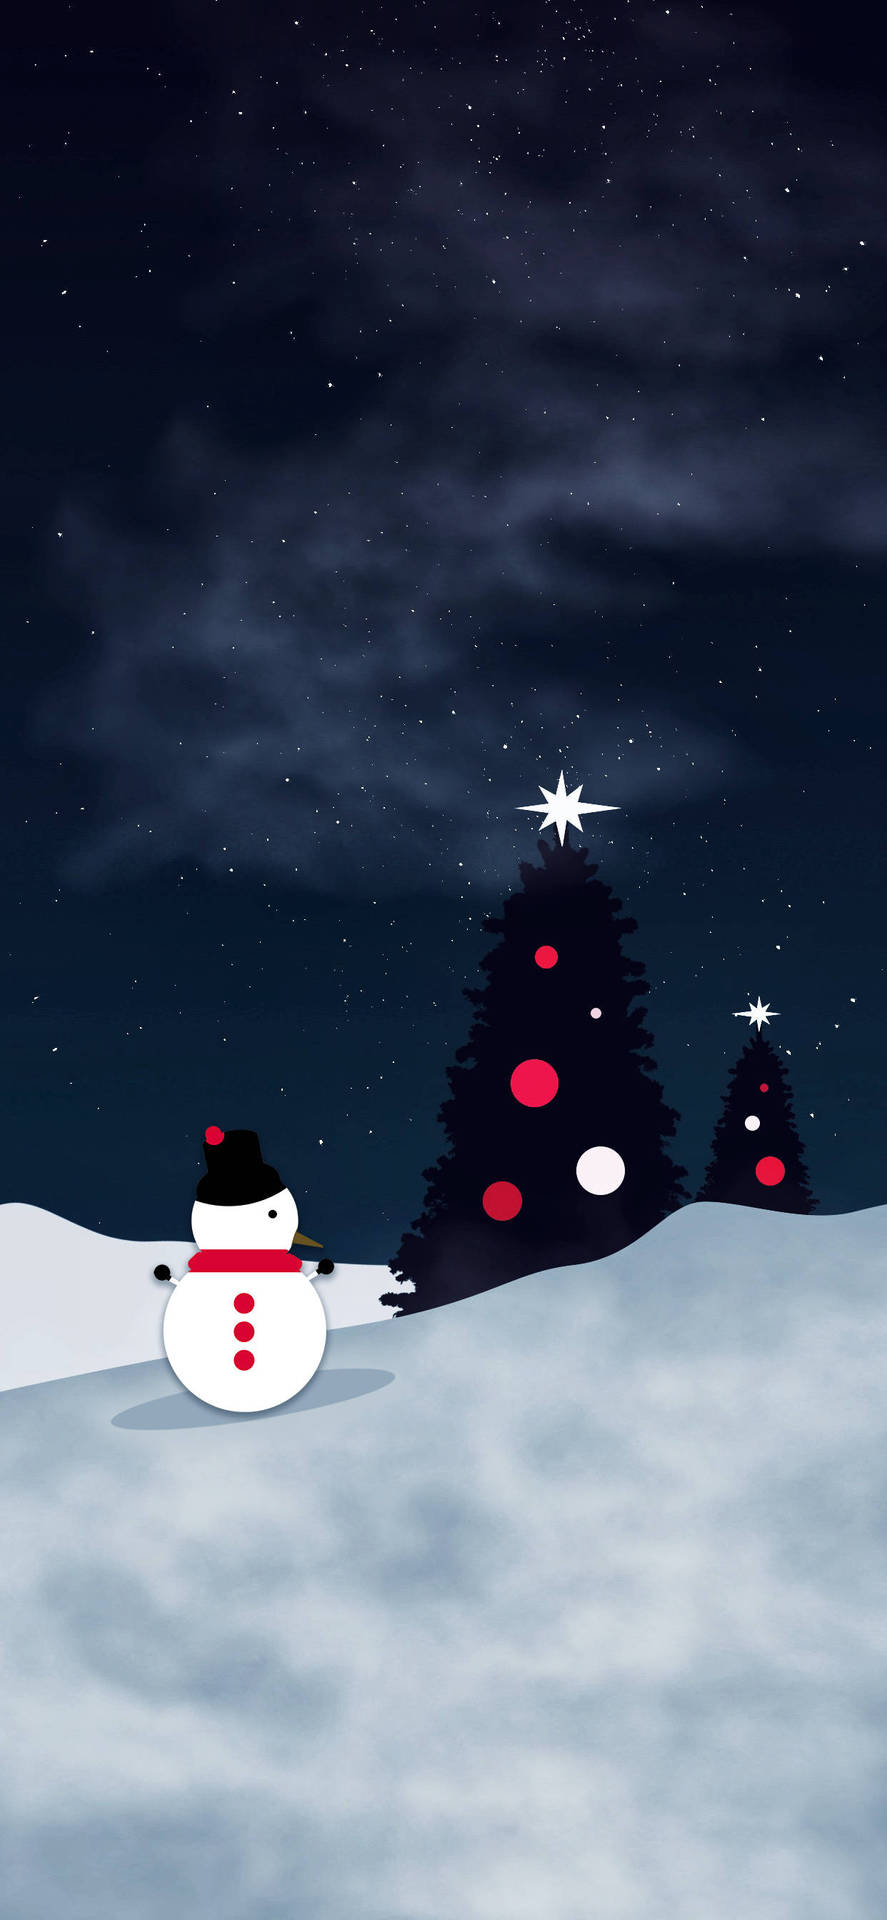 Aesthetic Christmas Iphone Of Snowman Background